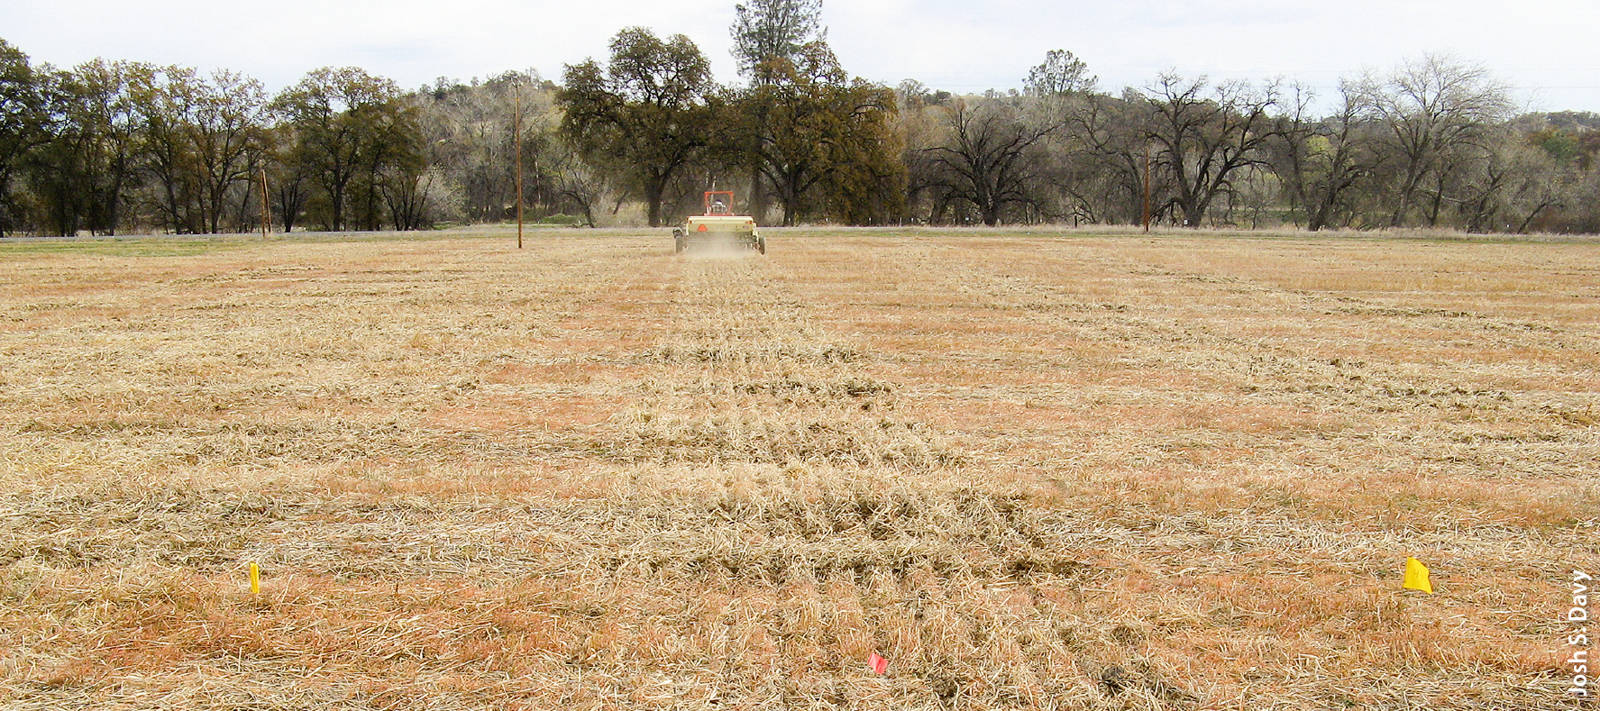 Seeding of a forage test plot in Paskenta (Tehama County), California. Forage productivity has become an increasingly important element in sustaining livestock production as rangeland acreage declines in California – on average, almost 54,000 acres of farming and grazing land were lost each year from 1984 to 2010.